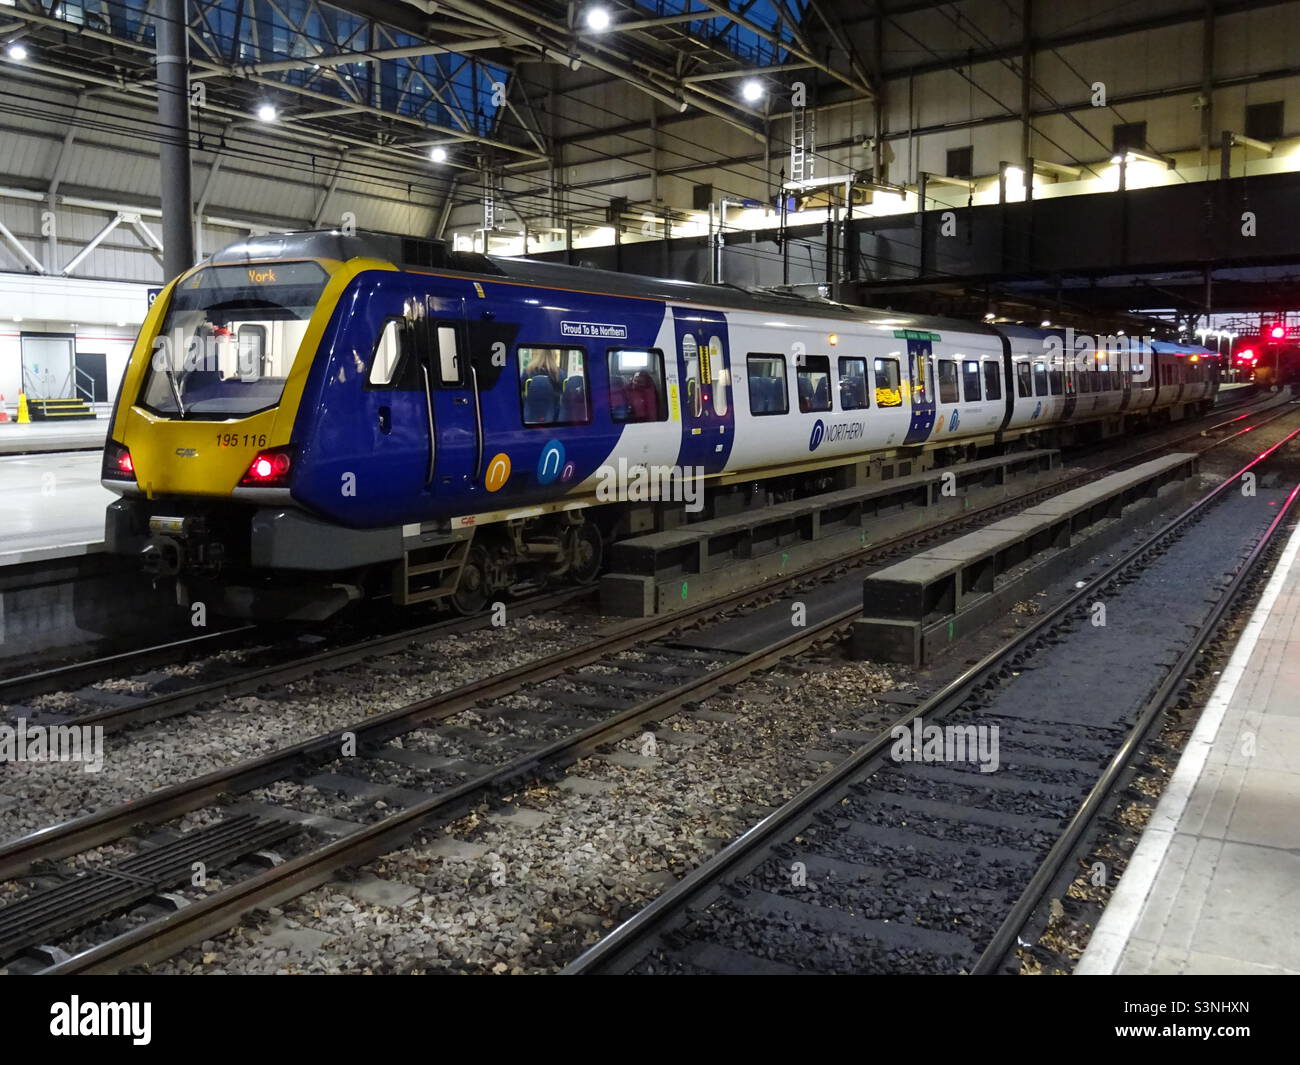 Northern Trains Class 195 Diesel Multiple Unit waits for passengers at Leeds whilst on a service to York Stock Photo